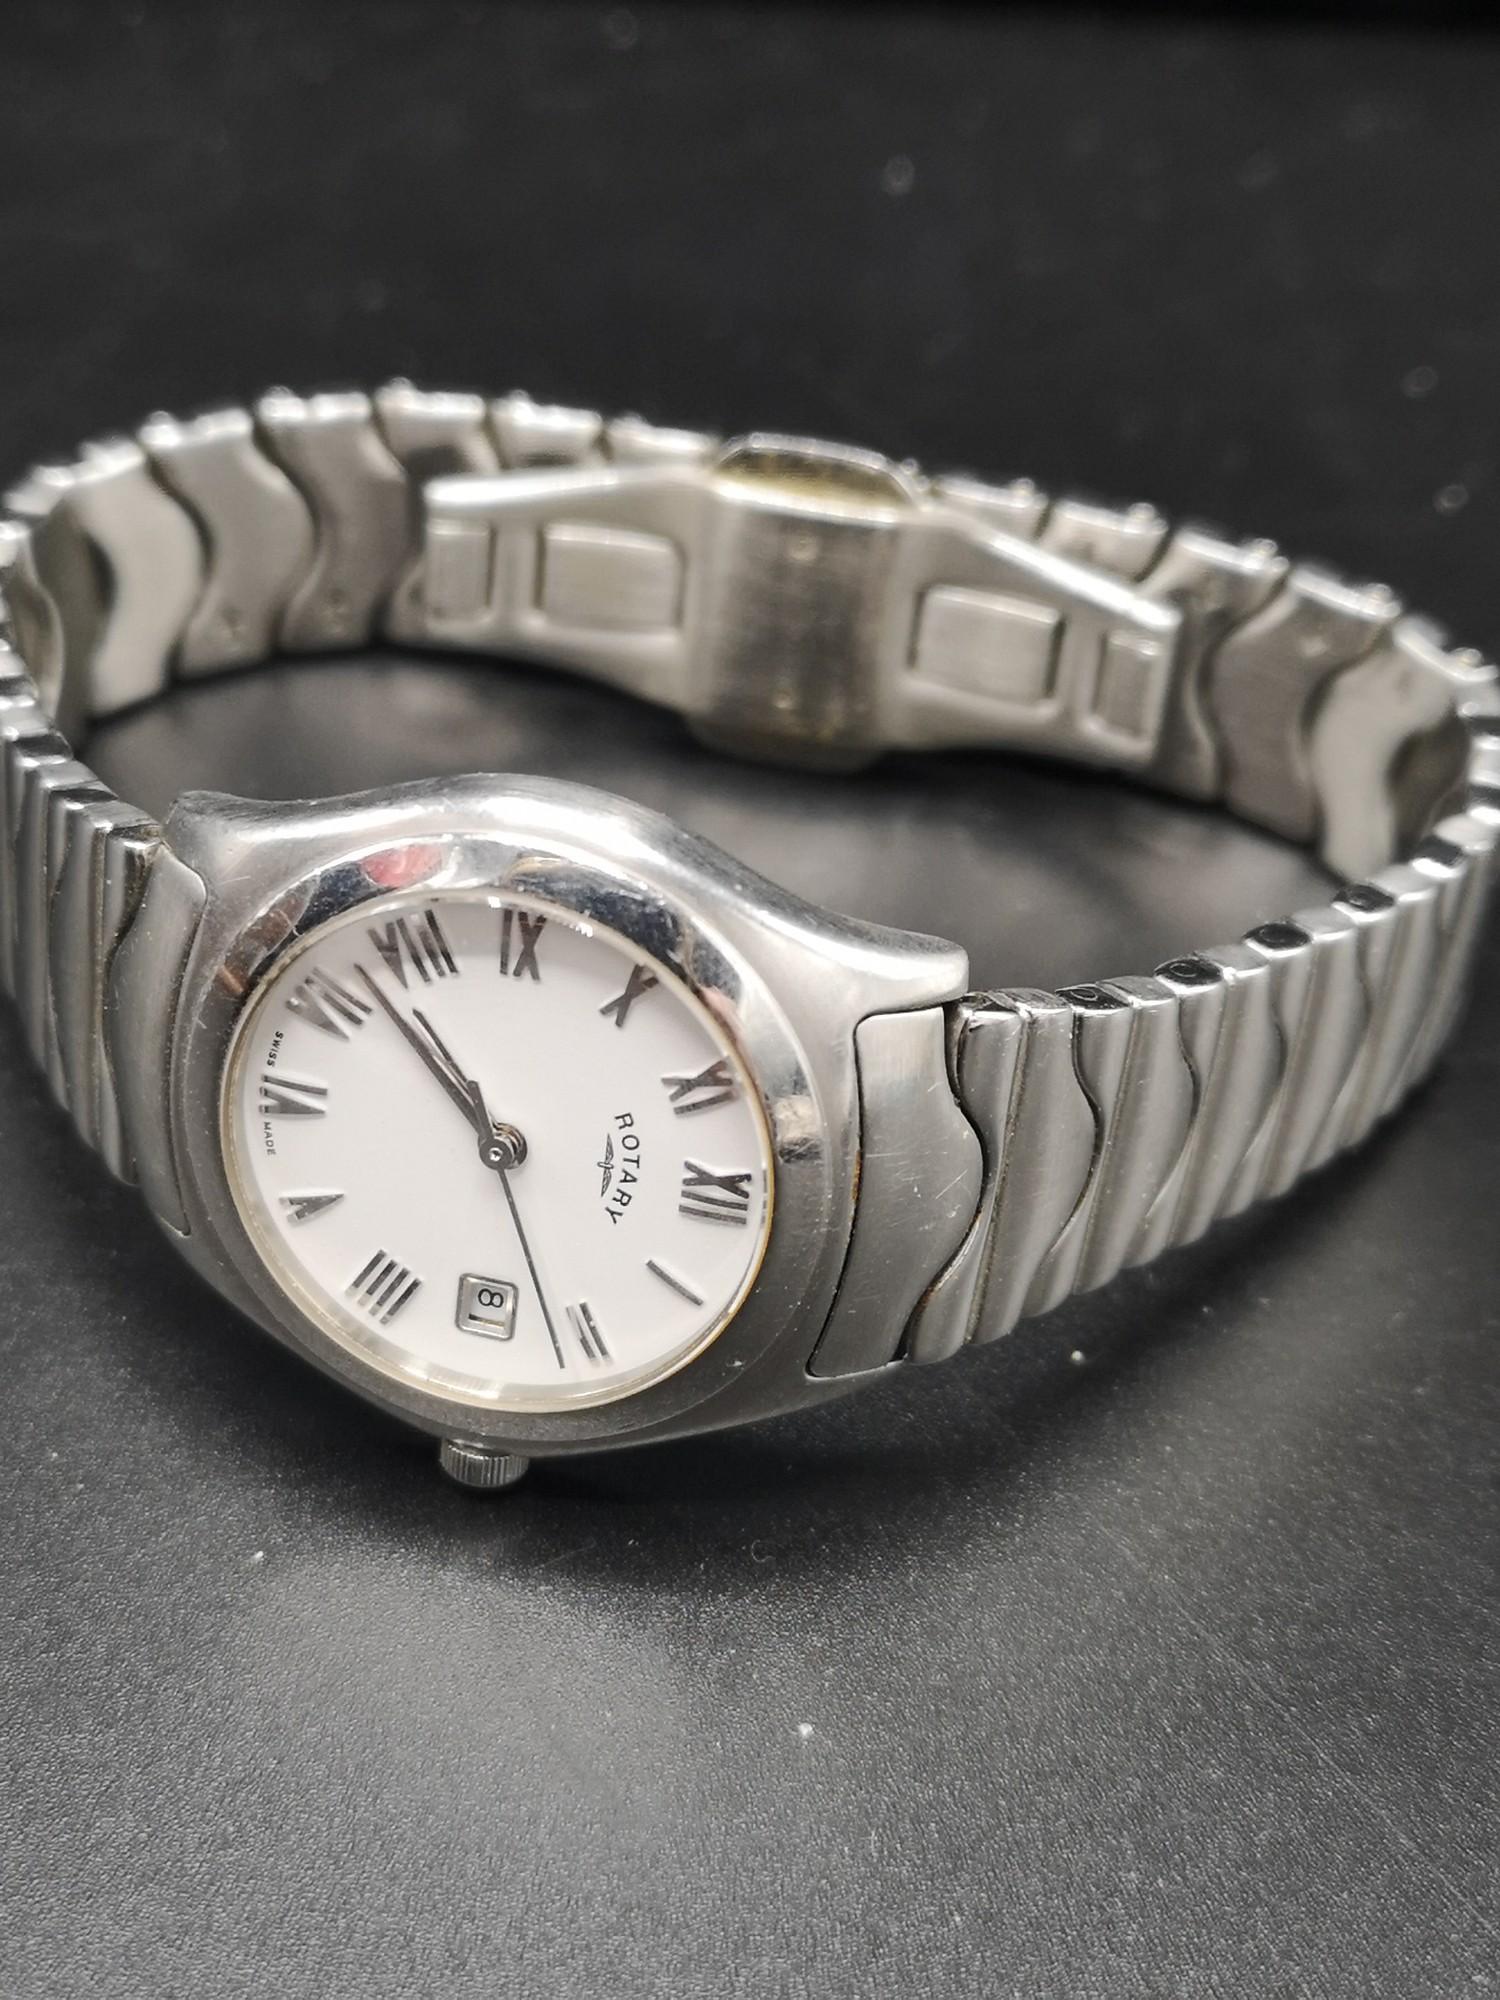 Rotary ladies stainless steel watch serial number 11467. Needs battery. - Image 2 of 2